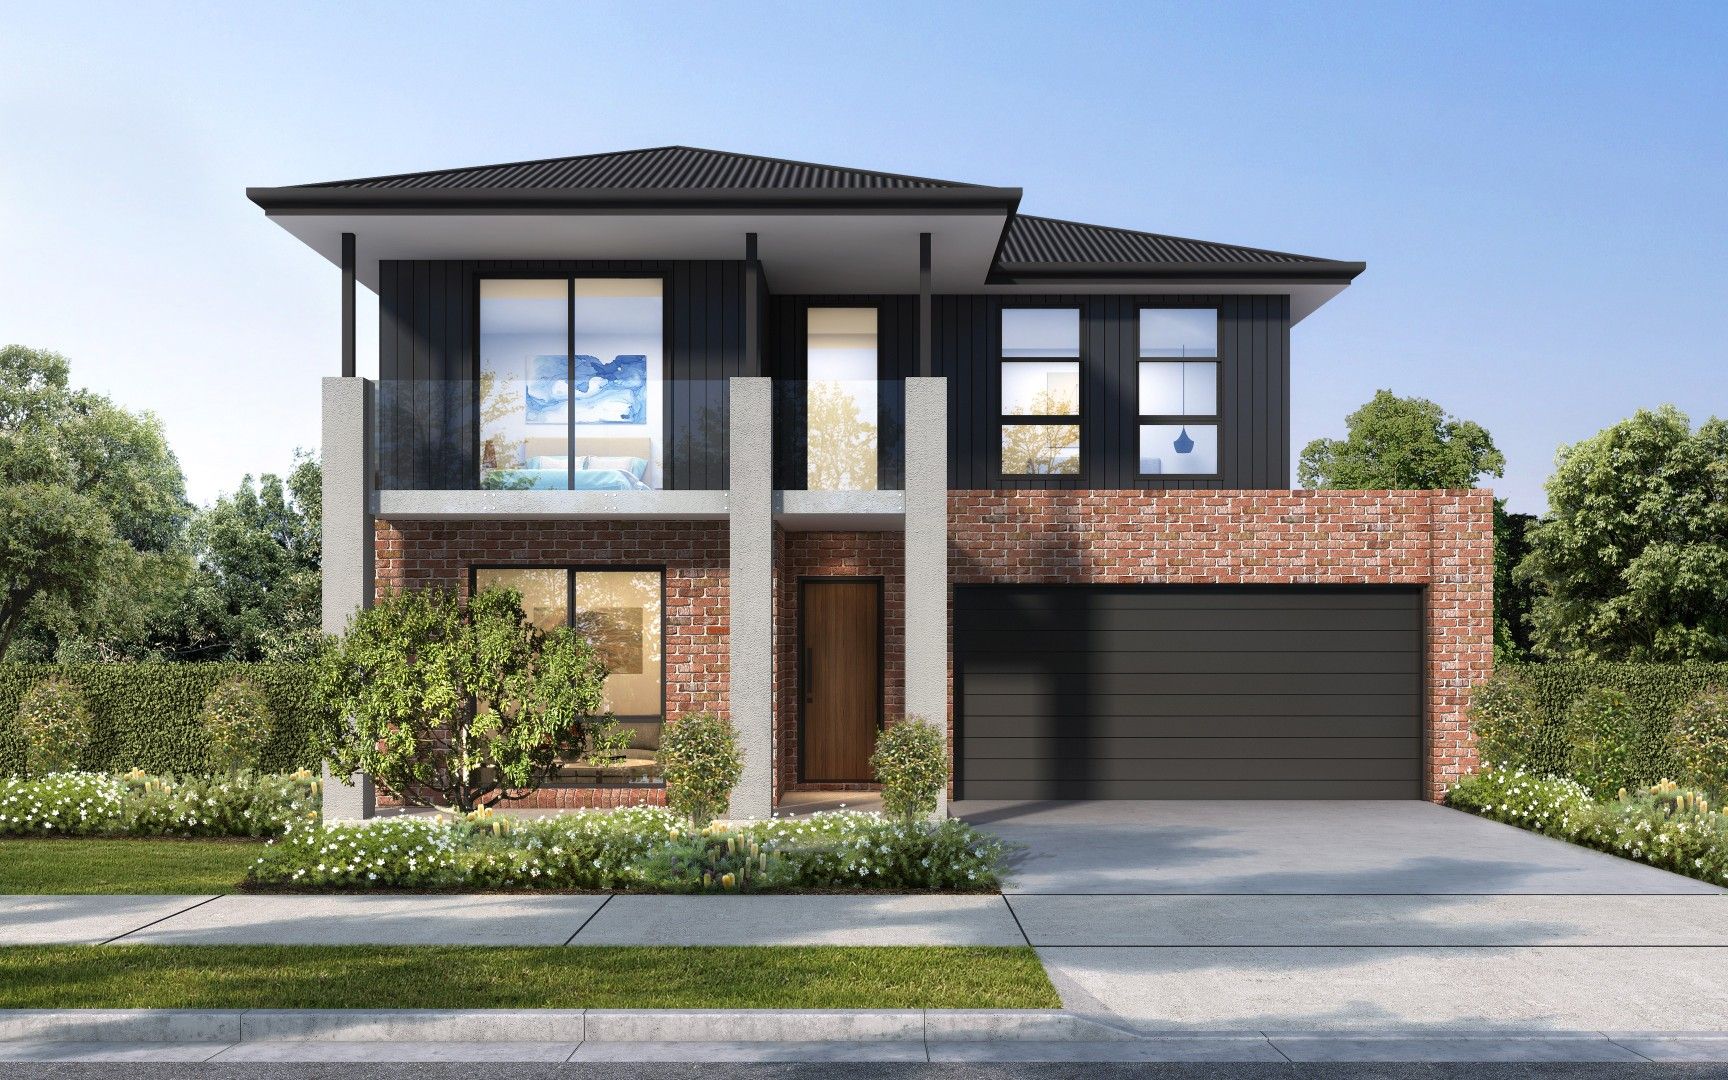 5 bedrooms New House & Land in Lot 4450 Gelderland Ave BOX HILL NSW, 2765